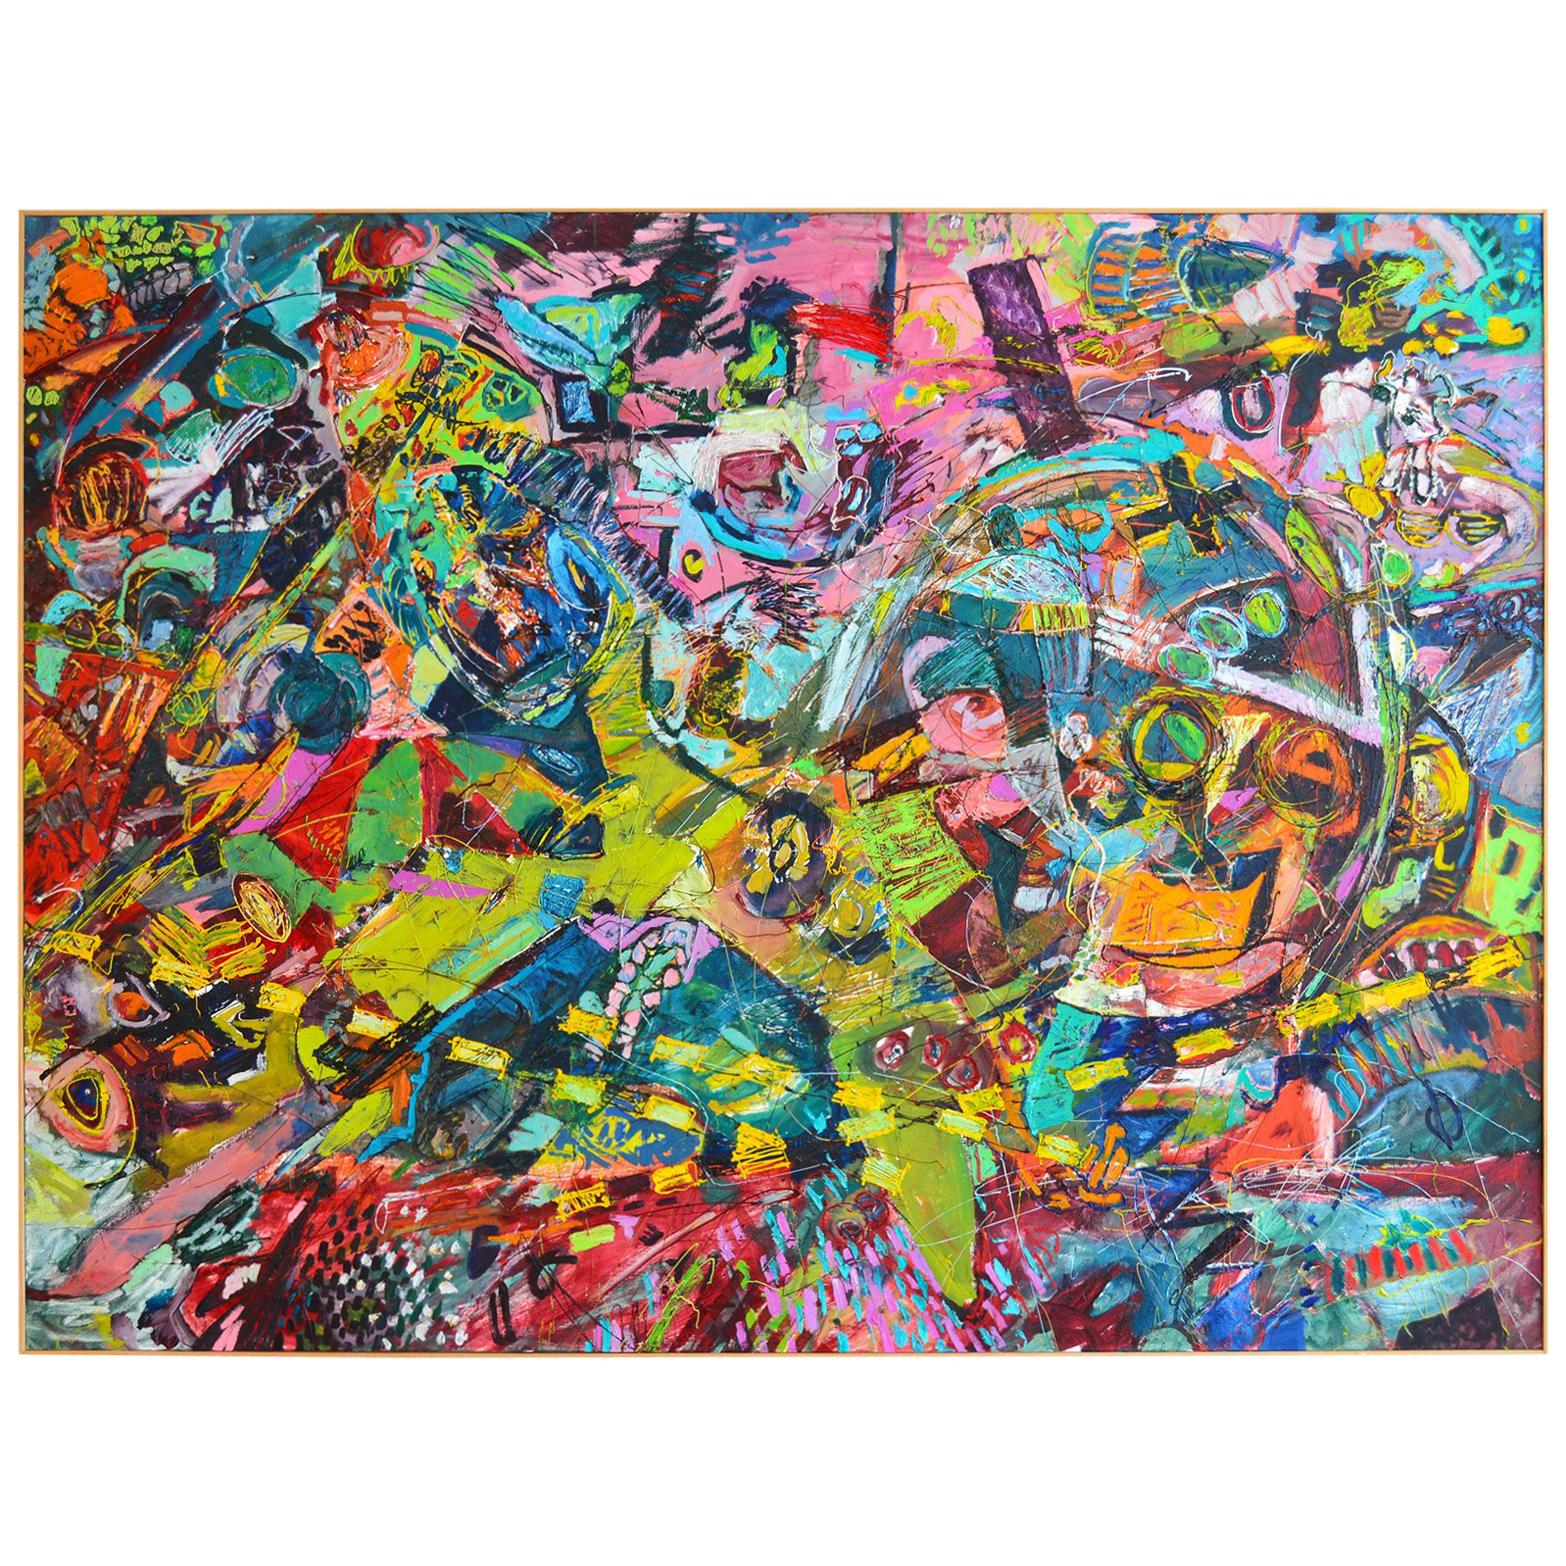 Large Abstract Expressionist Oil on Canvas by Chuck Dugan, (1947-2007)